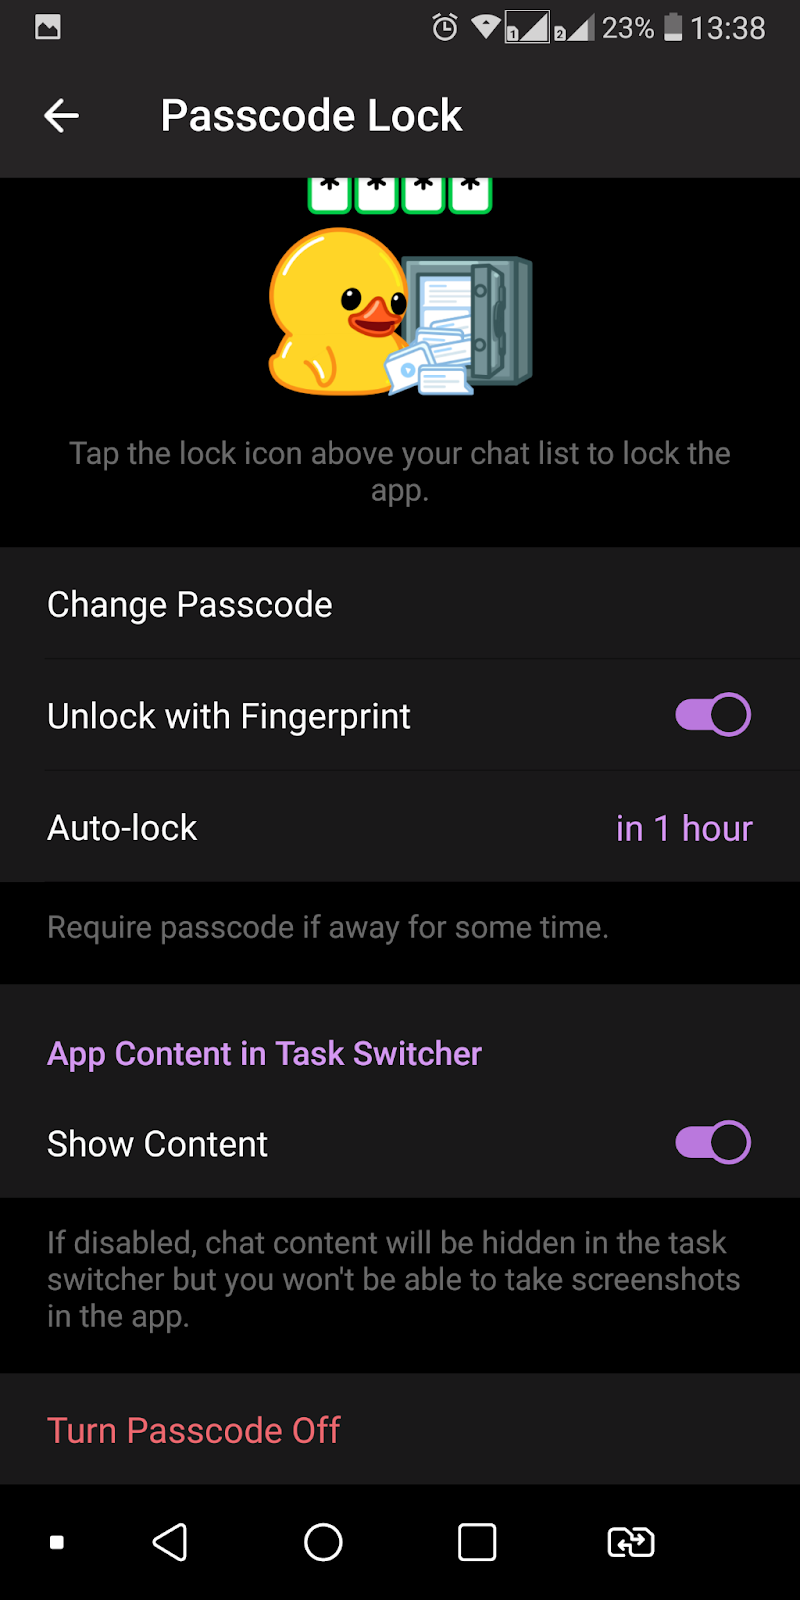 If your telegram is hacked consider using a passcode lock